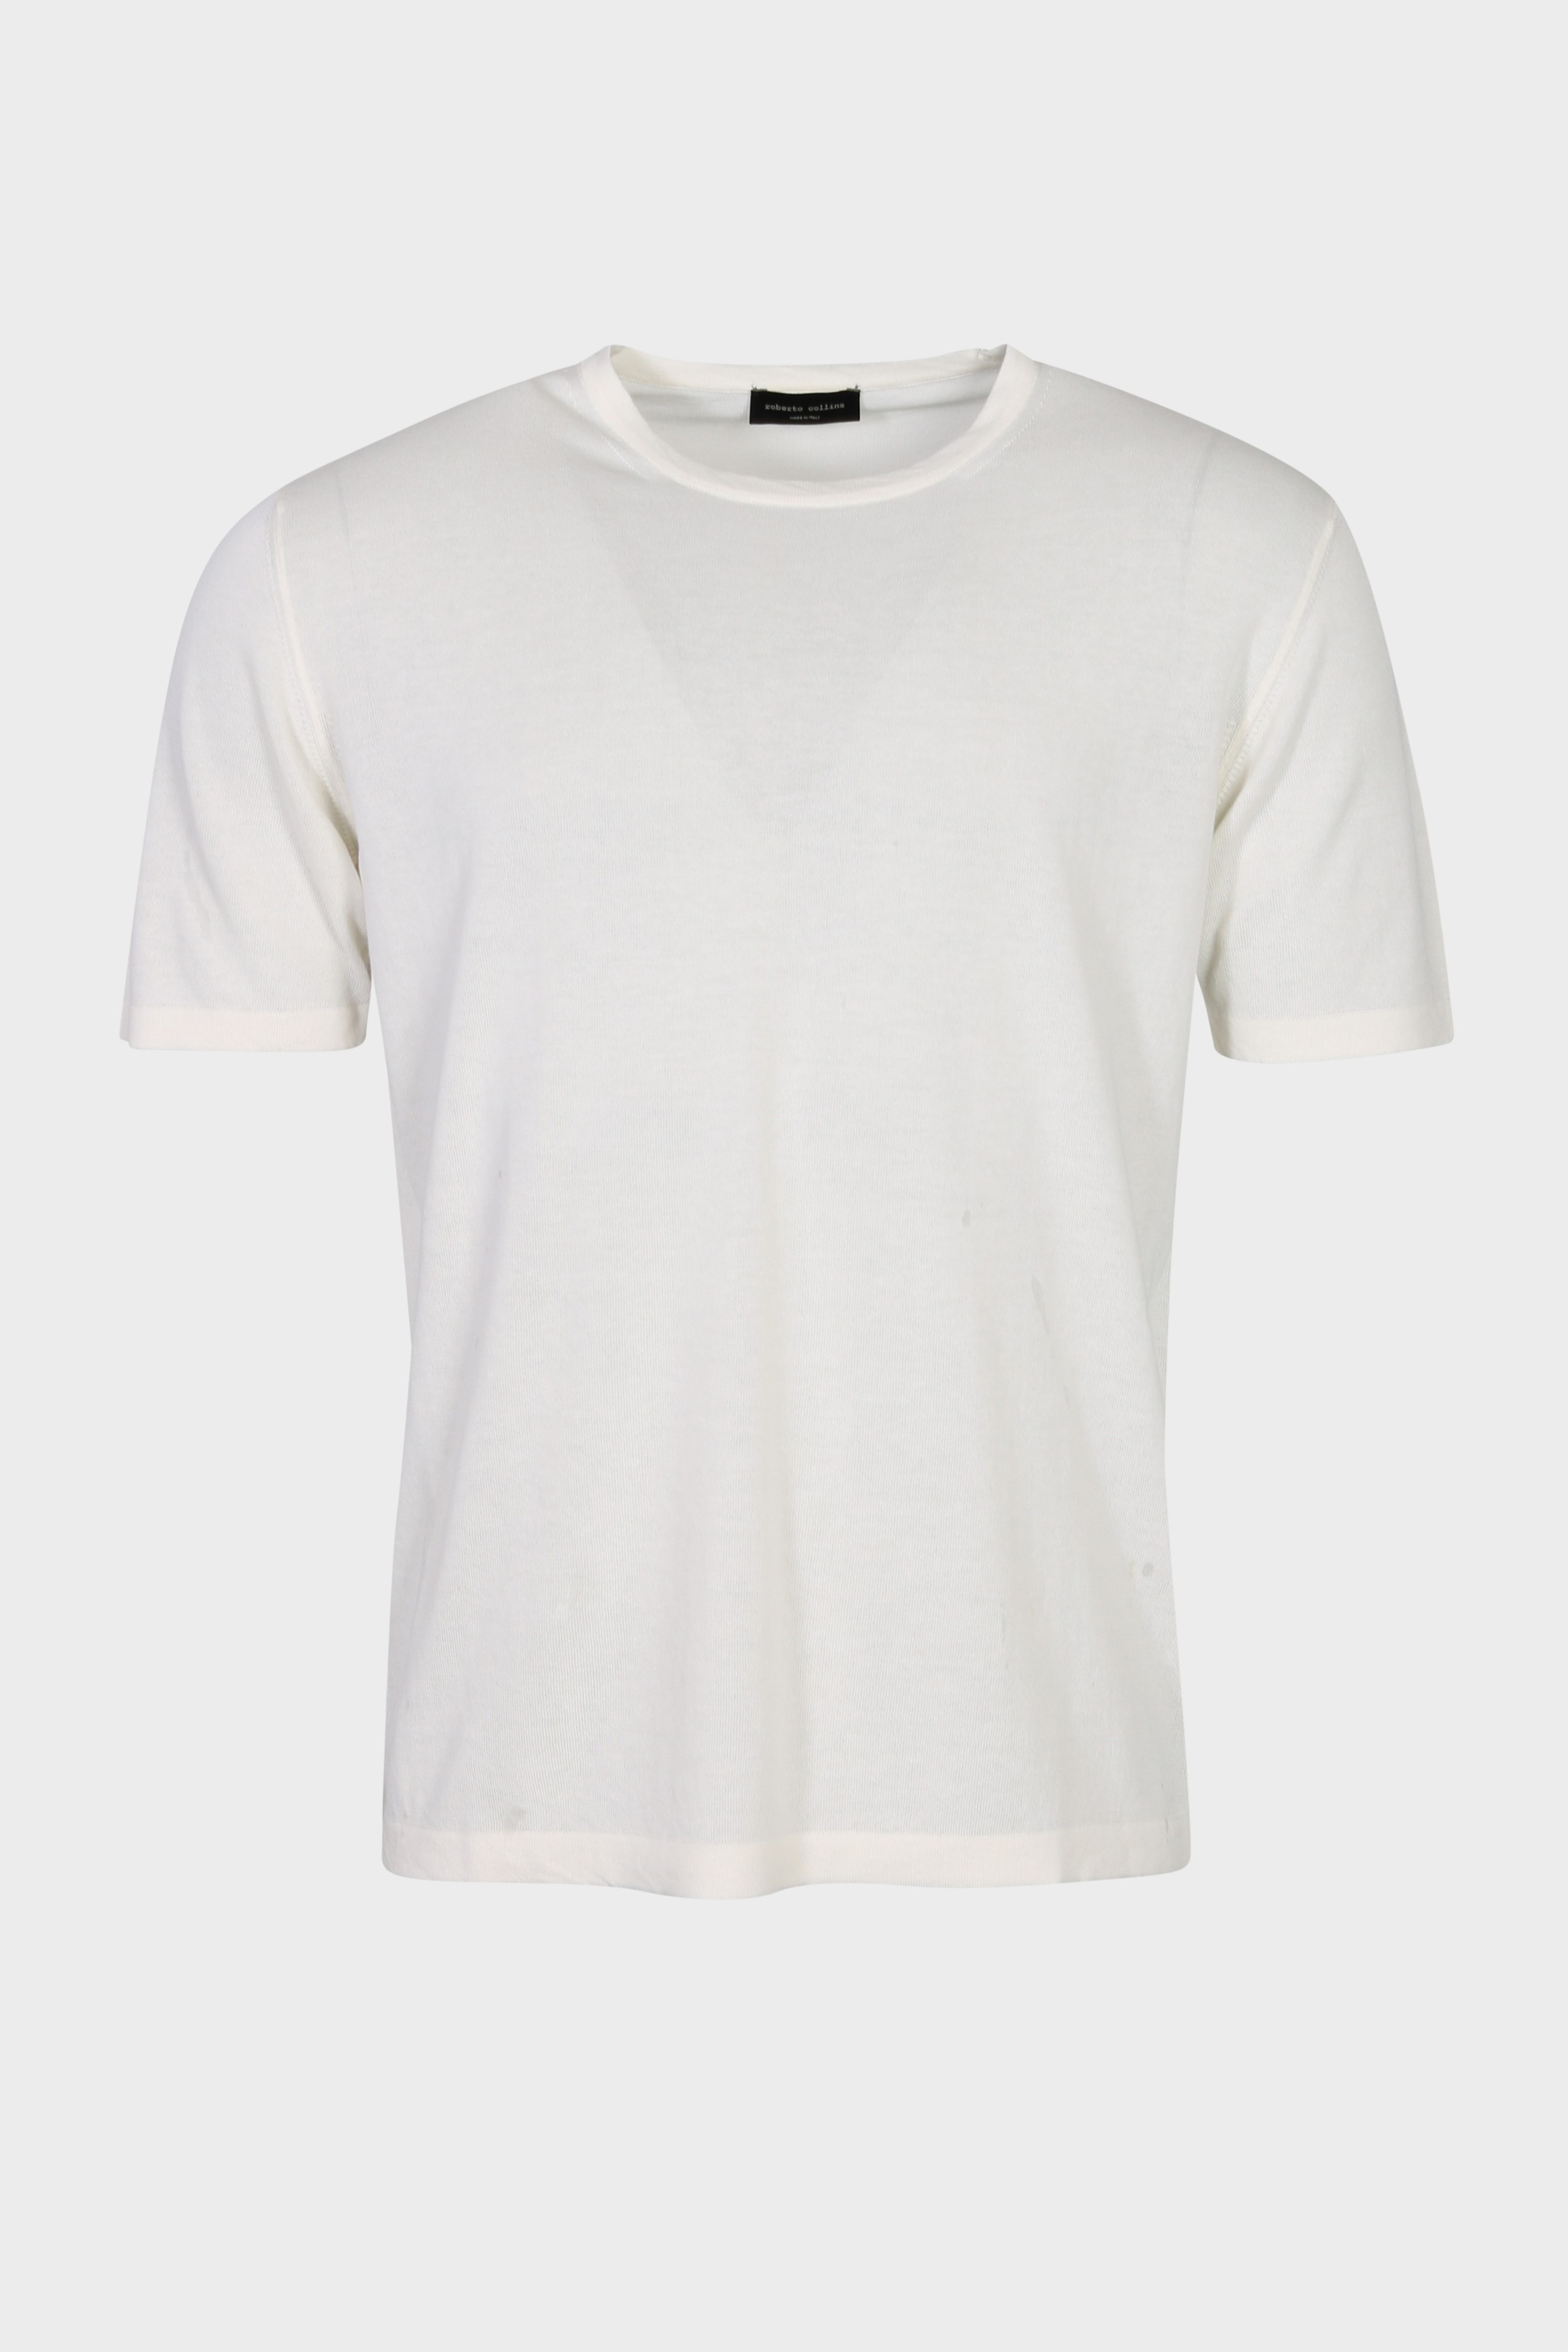 ROBERTO COLLINA Cotton Knit T-Shirt in Offwhite 52